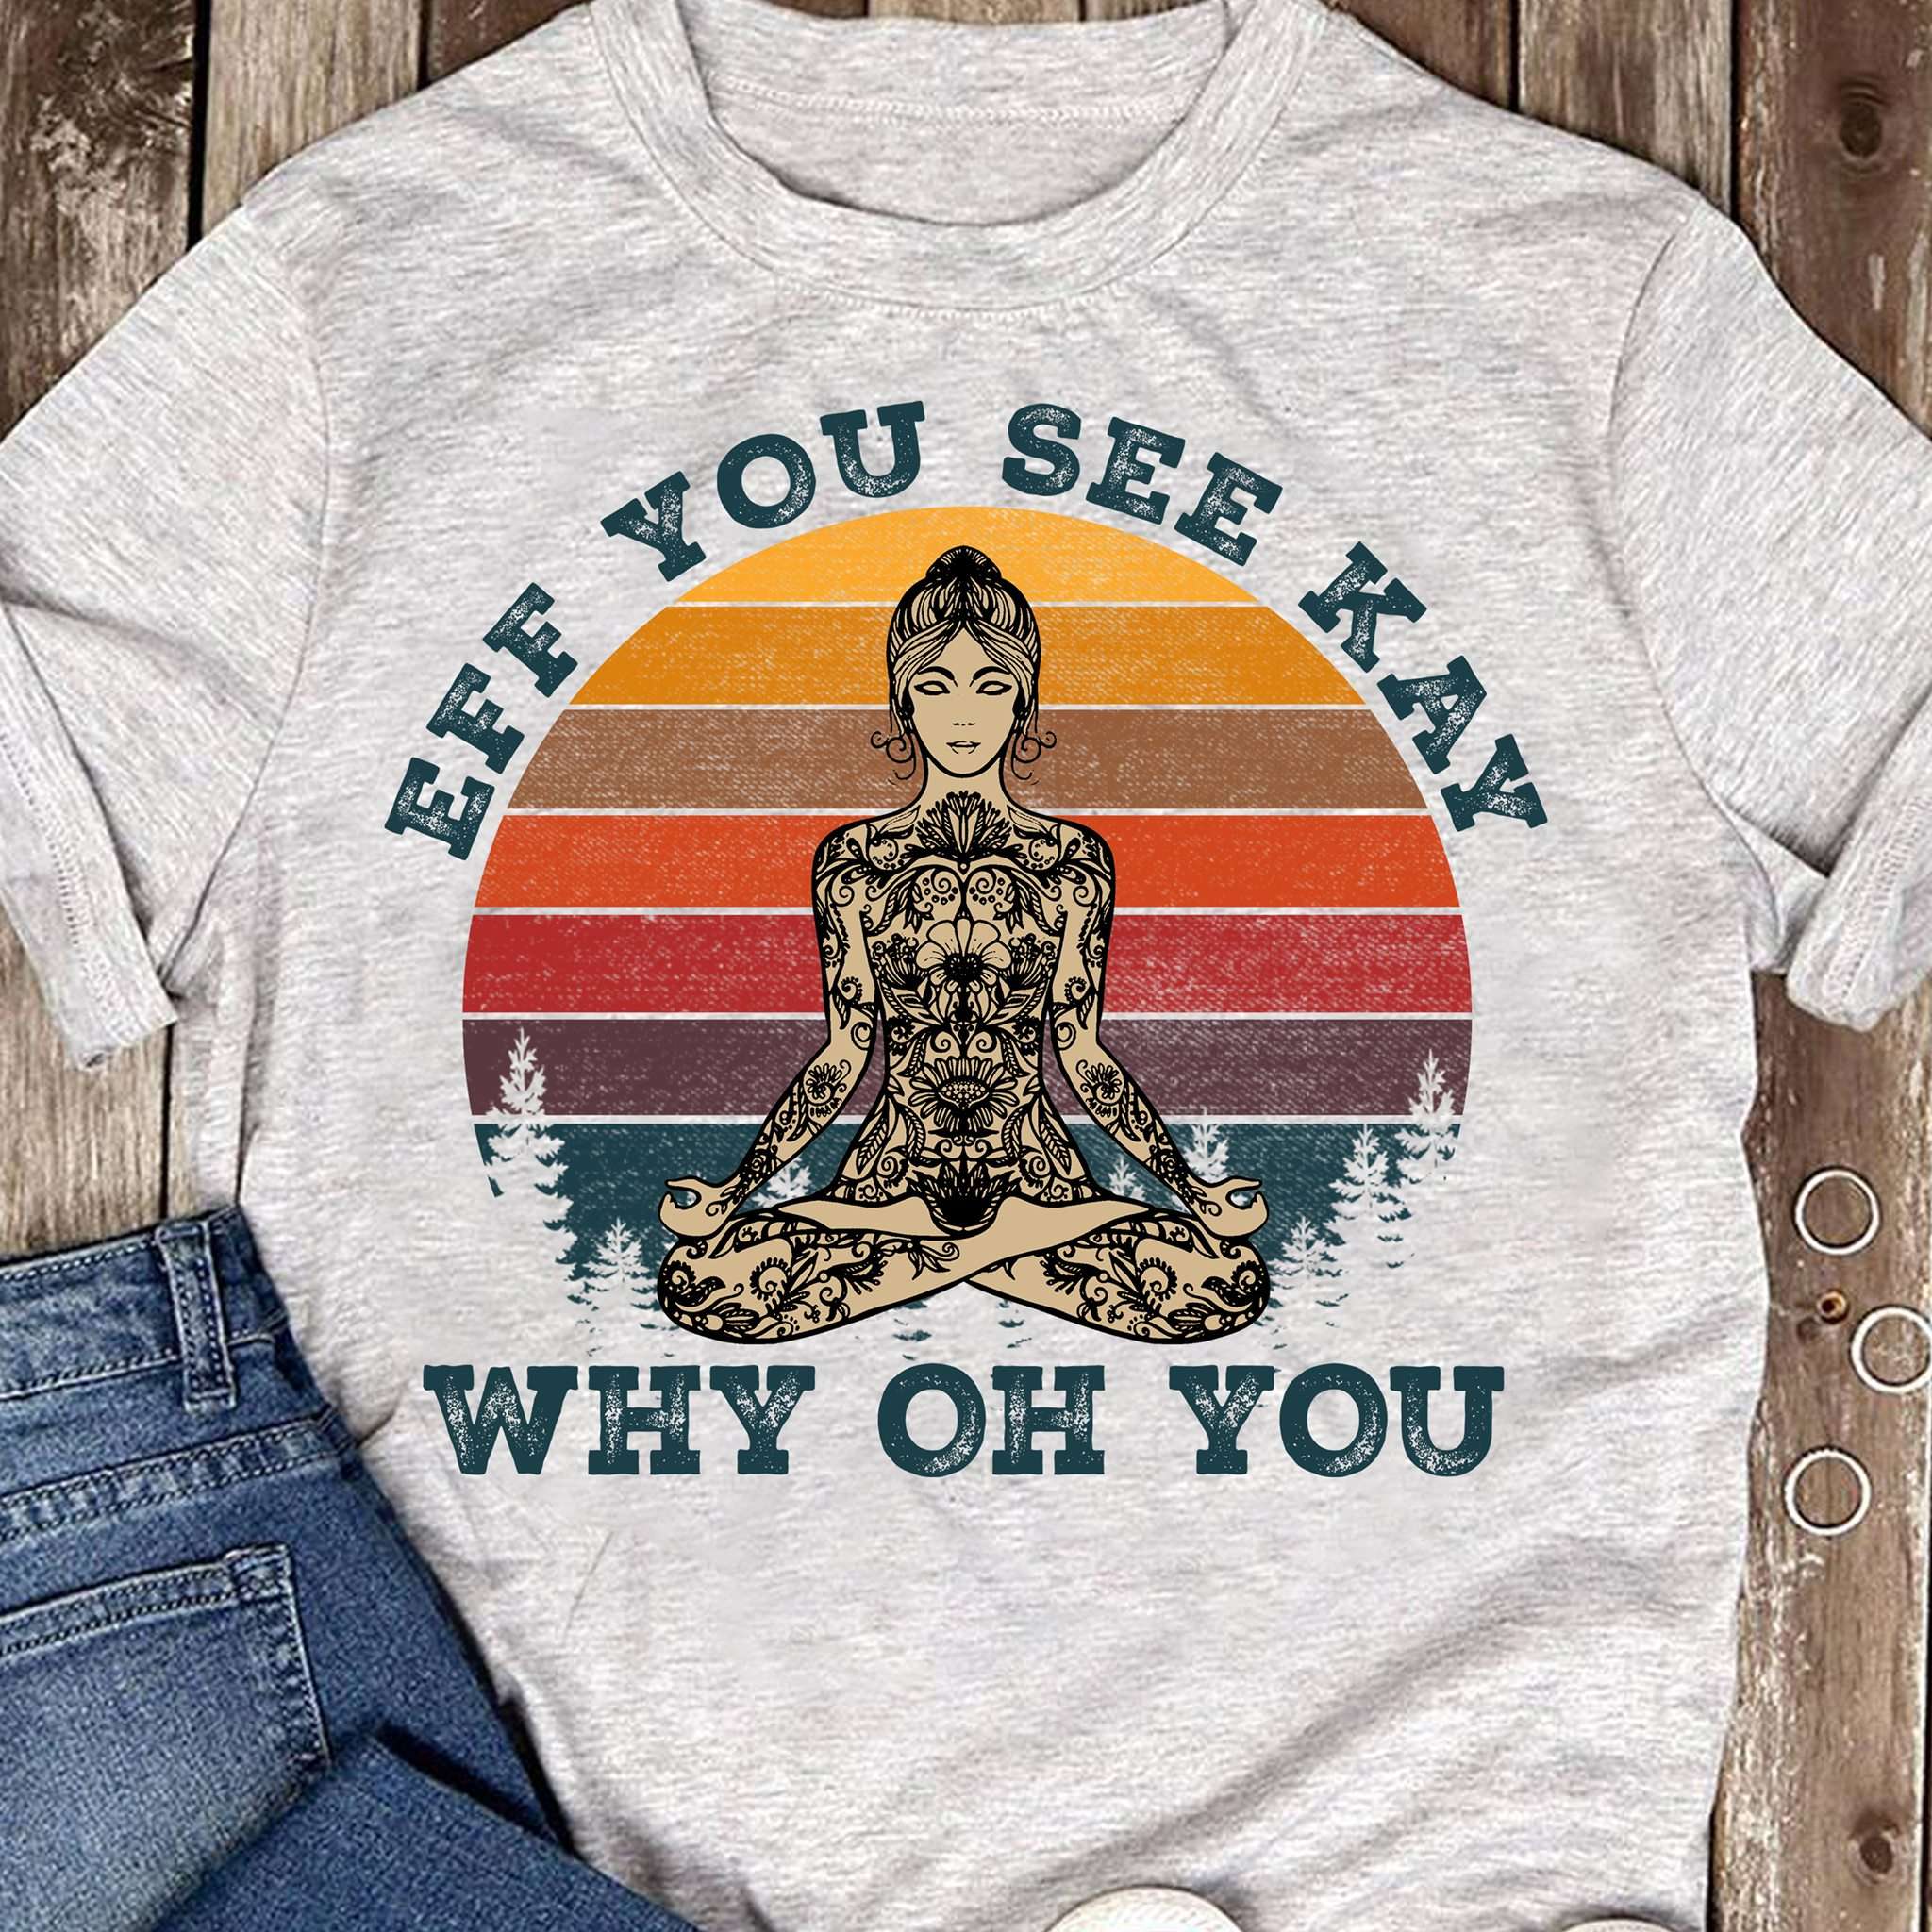 Eff you see kay why oh you - Tattooed woman, woman doing yoga